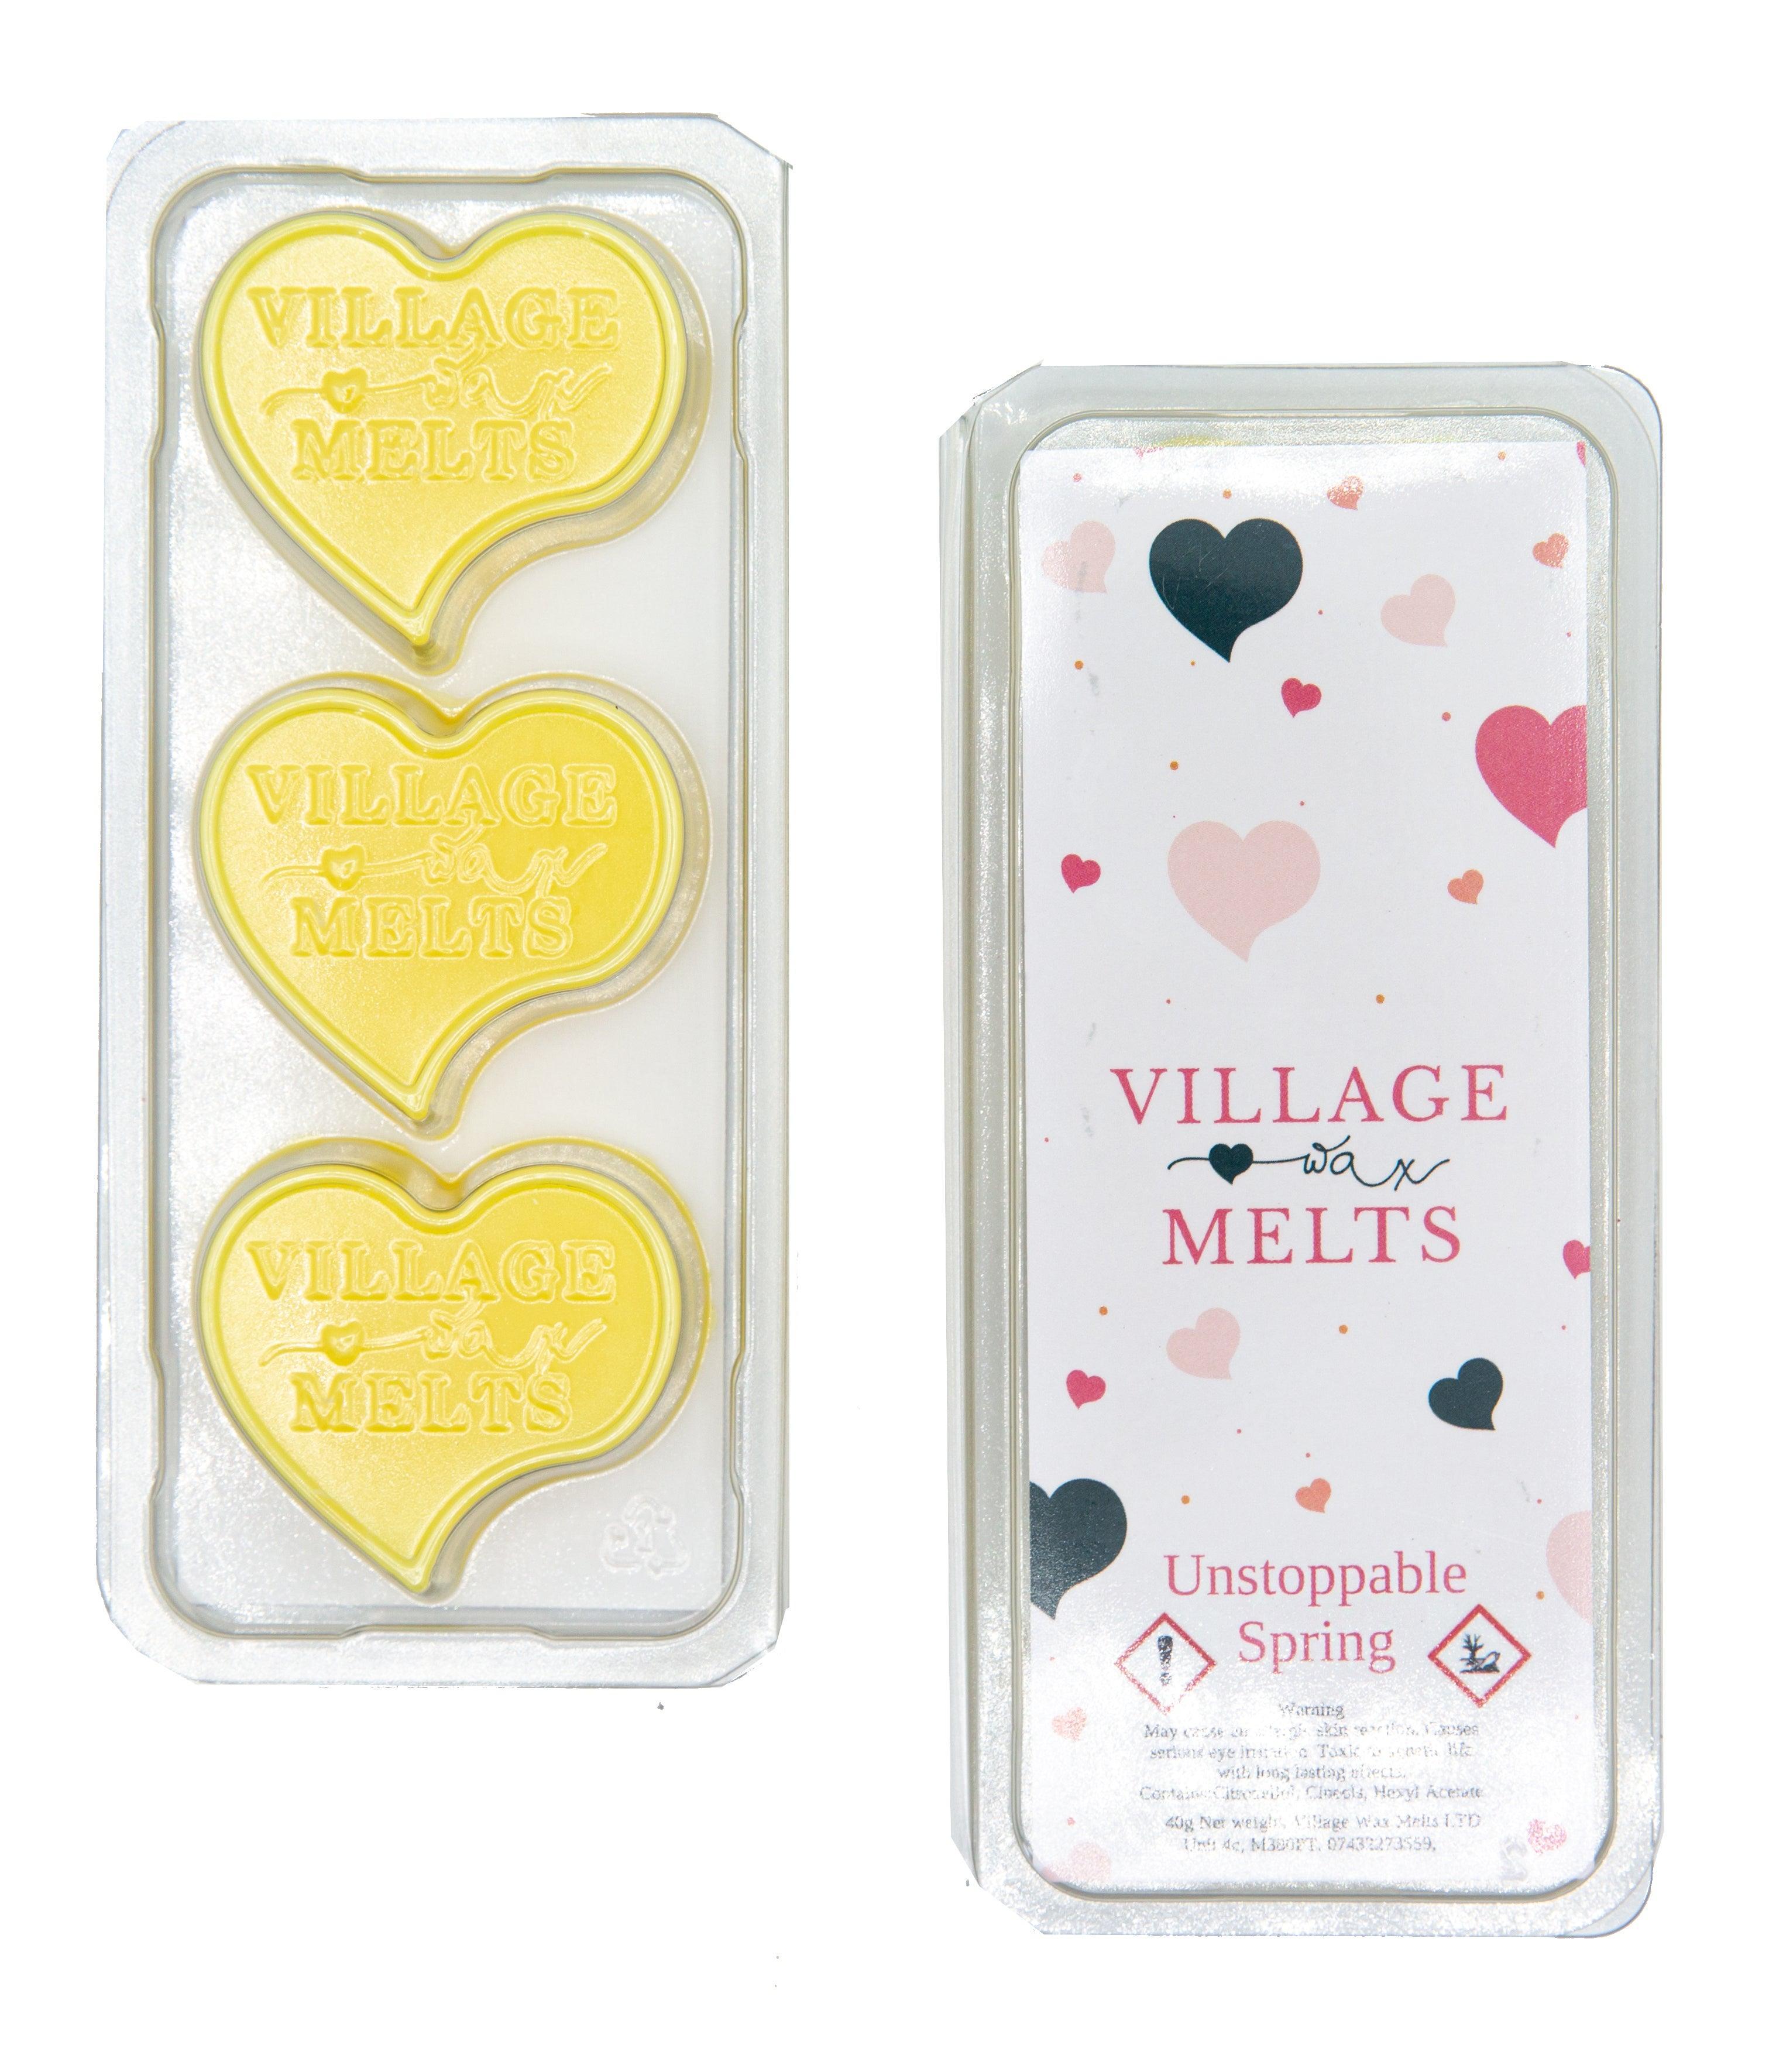 Unstoppables Spring Wax Melts – Village Wax Melts